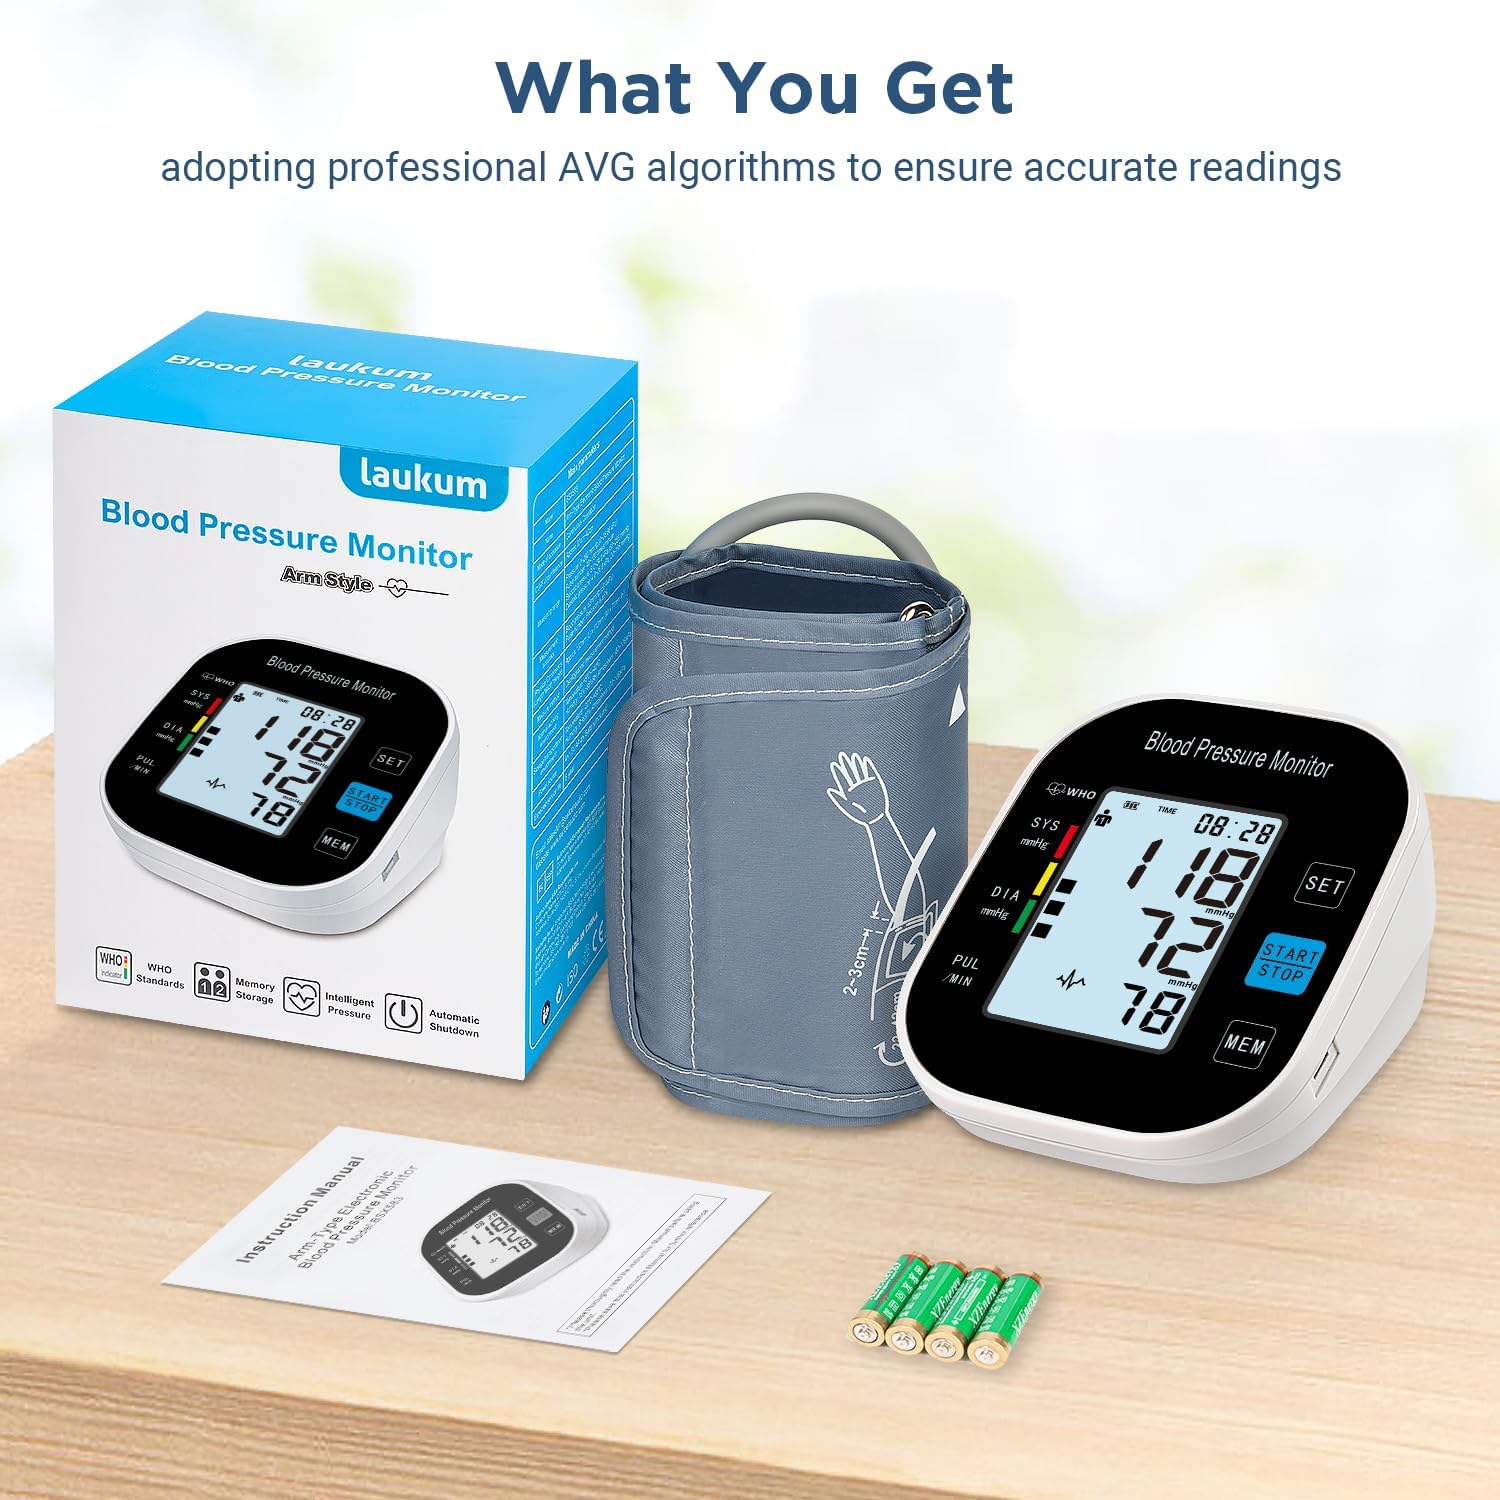 Blood Pressure Monitor for Home Use - Automatic BP Machine with Large Backlit Display